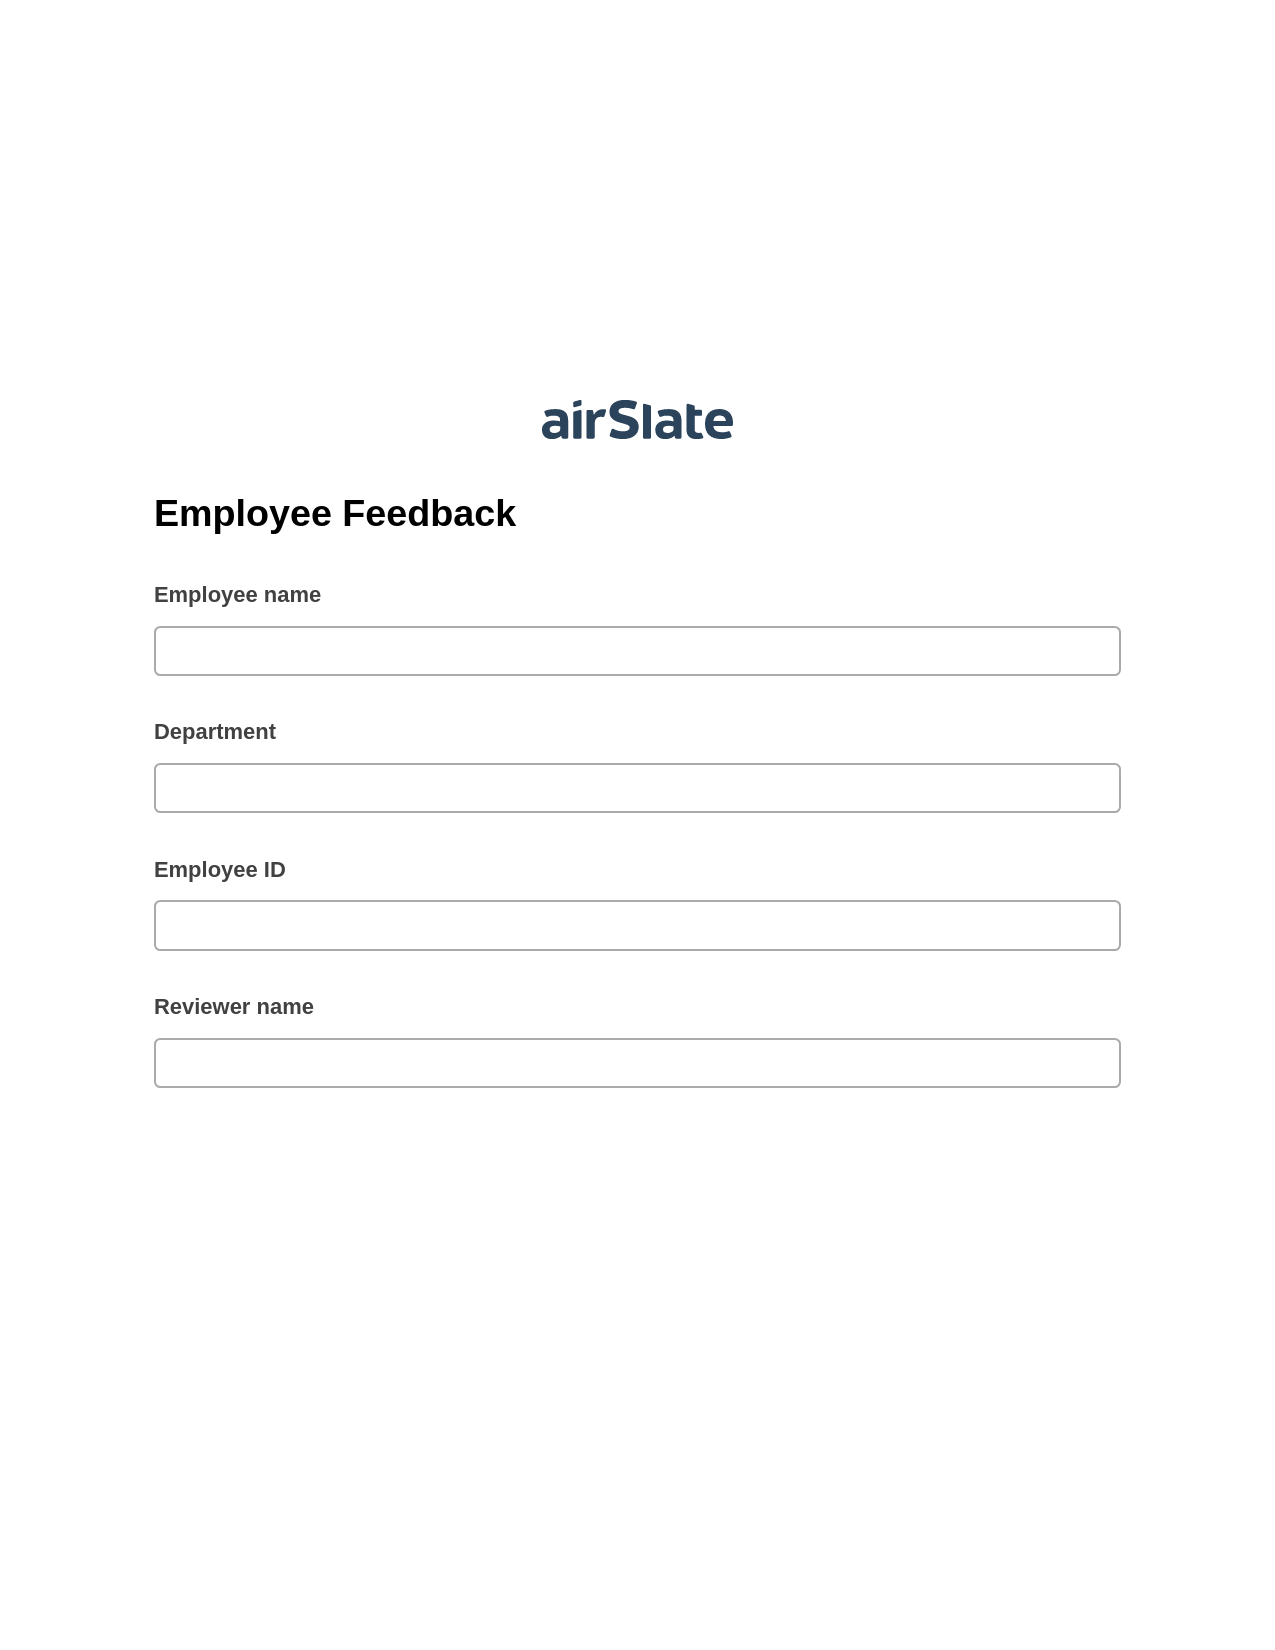 Employee Feedback Pre-fill Slate from MS Dynamics 365 Records Bot, Create Slate every Google Sheet Update Bot, Export to Excel 365 Bot